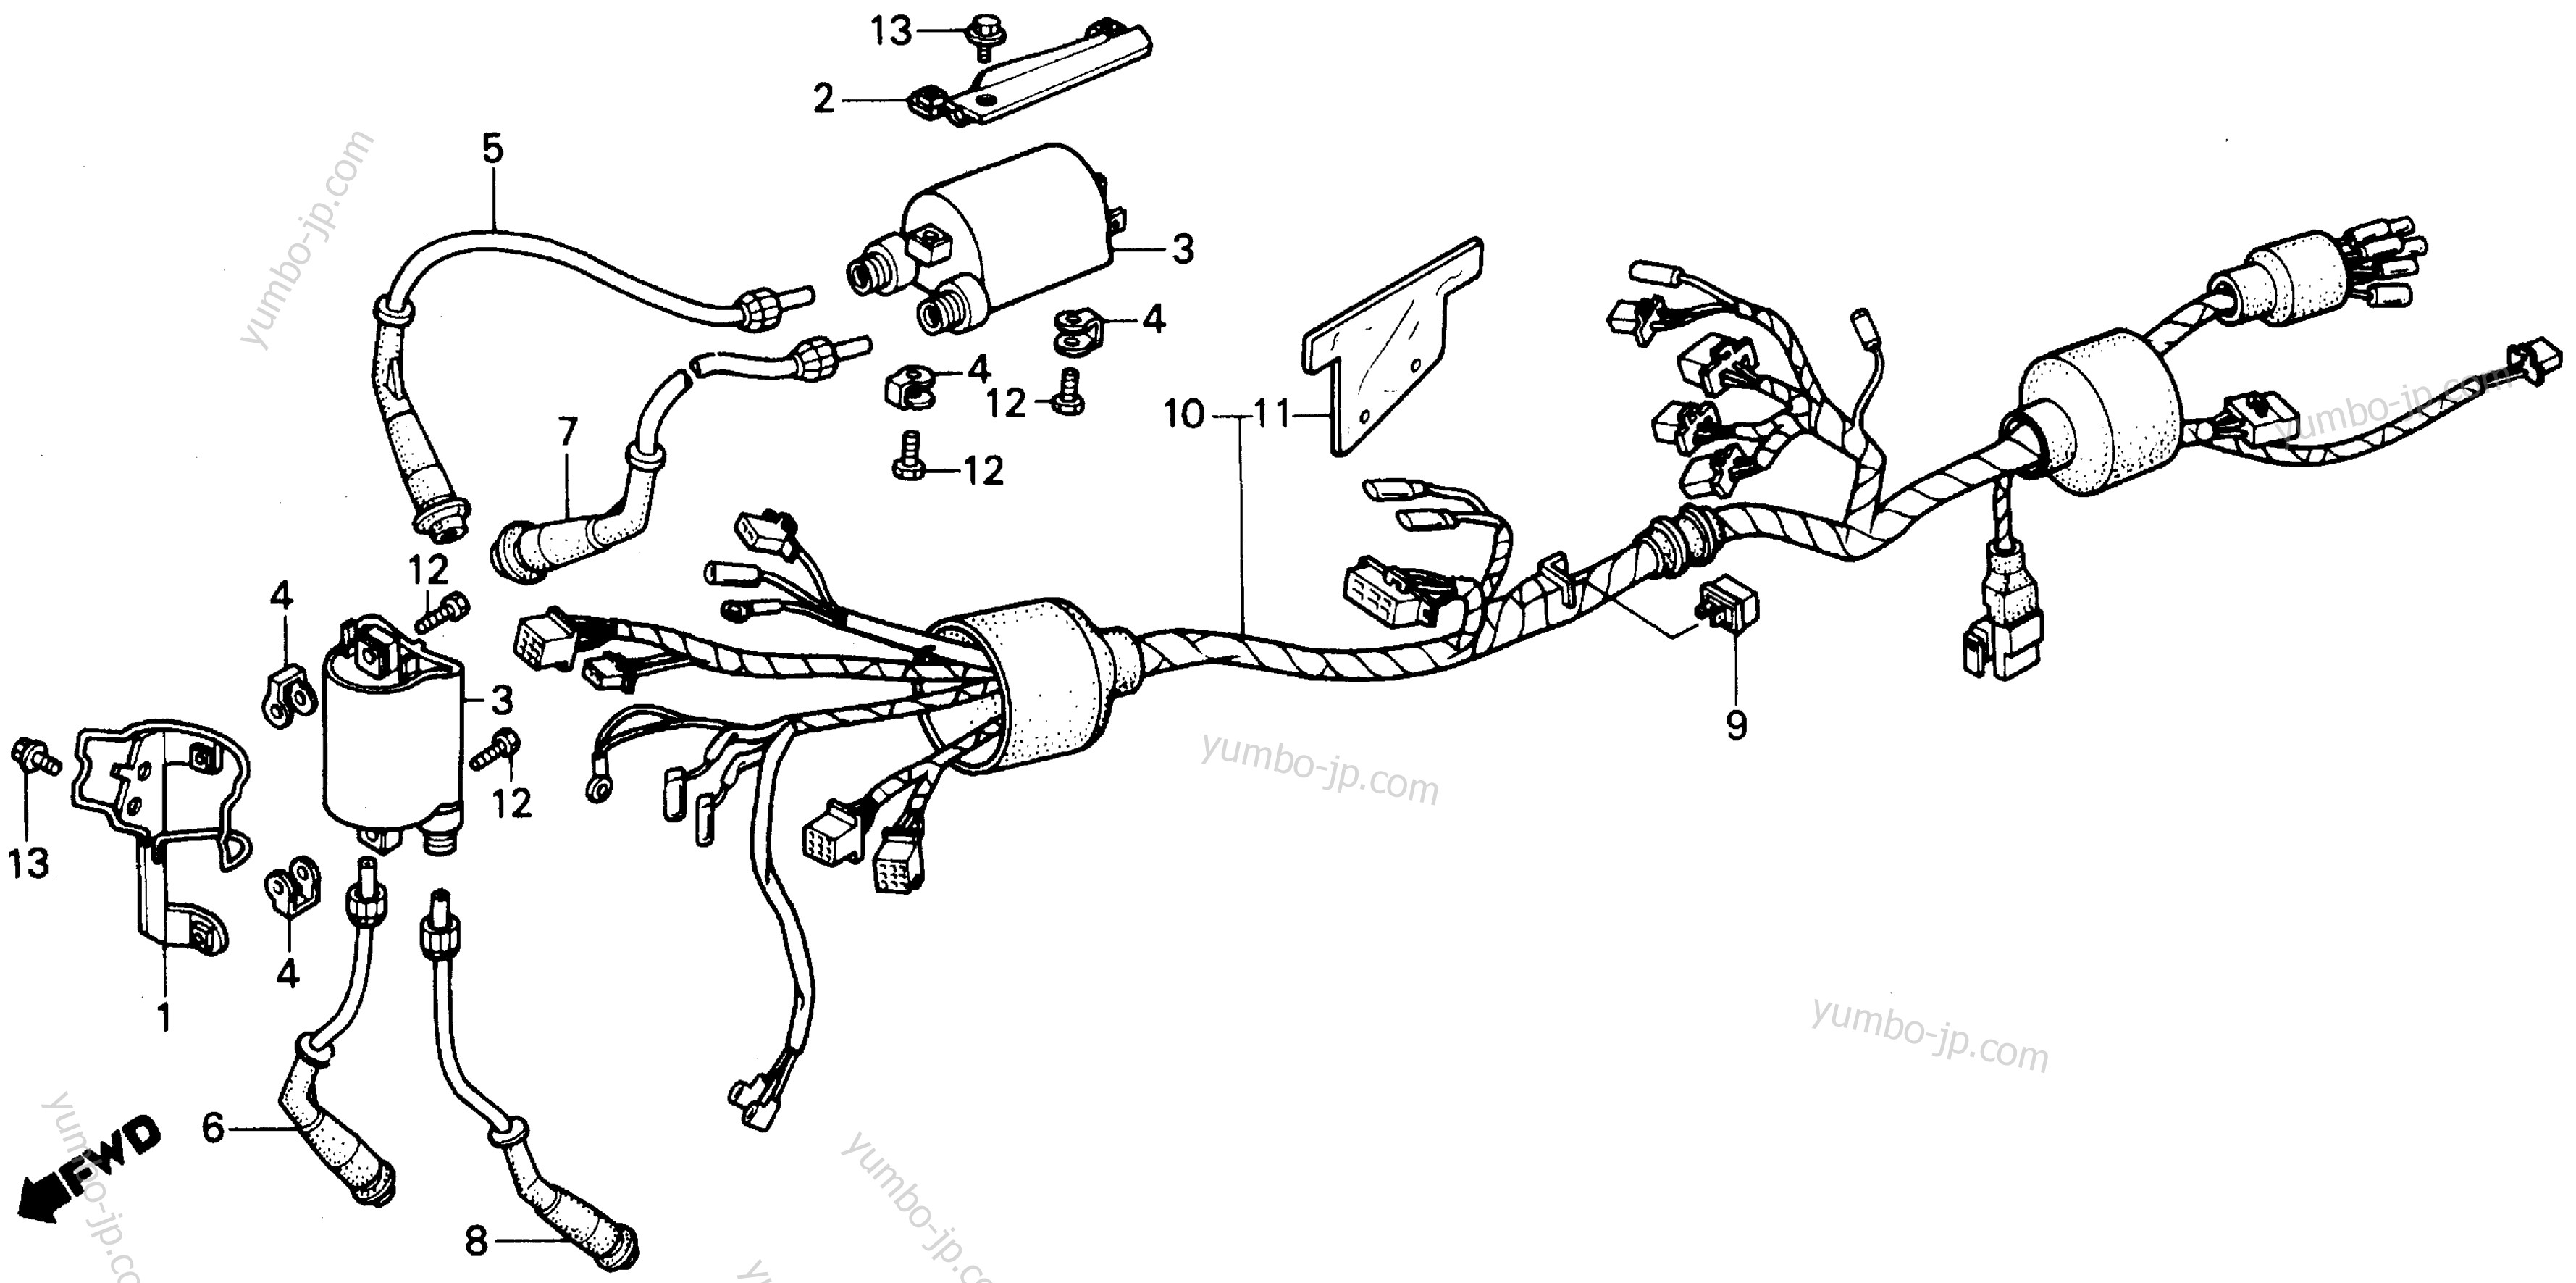 WIRE HARNESS for motorcycles HONDA VF750C A 1988 year